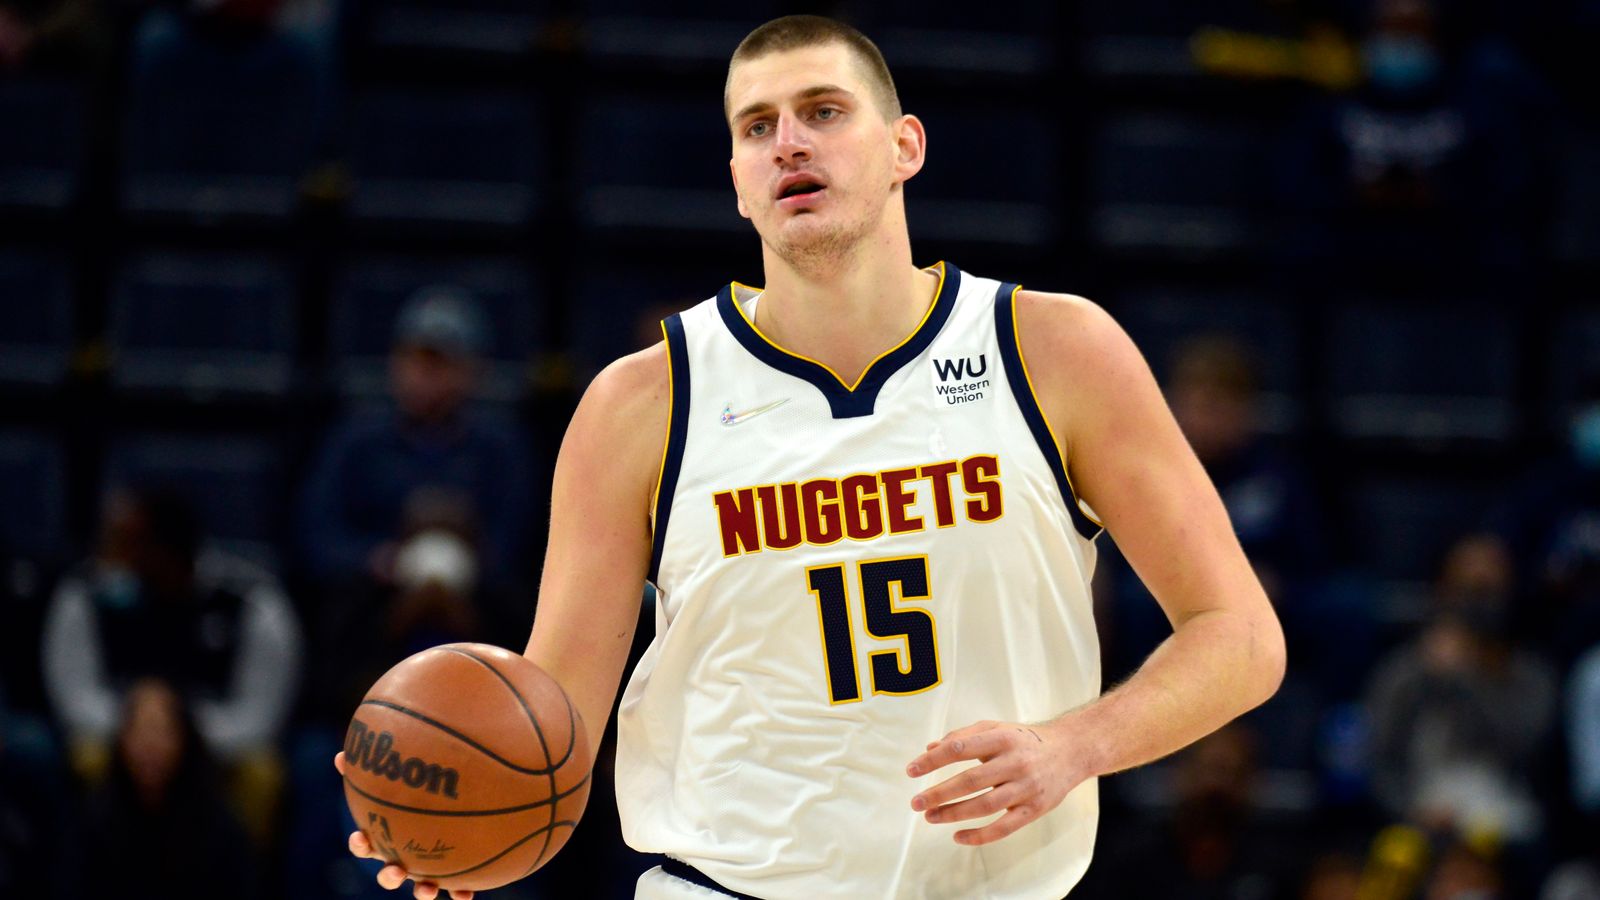 Nikola Jokic's Agent Reveals The Superstar Got Gifted A Nuggets